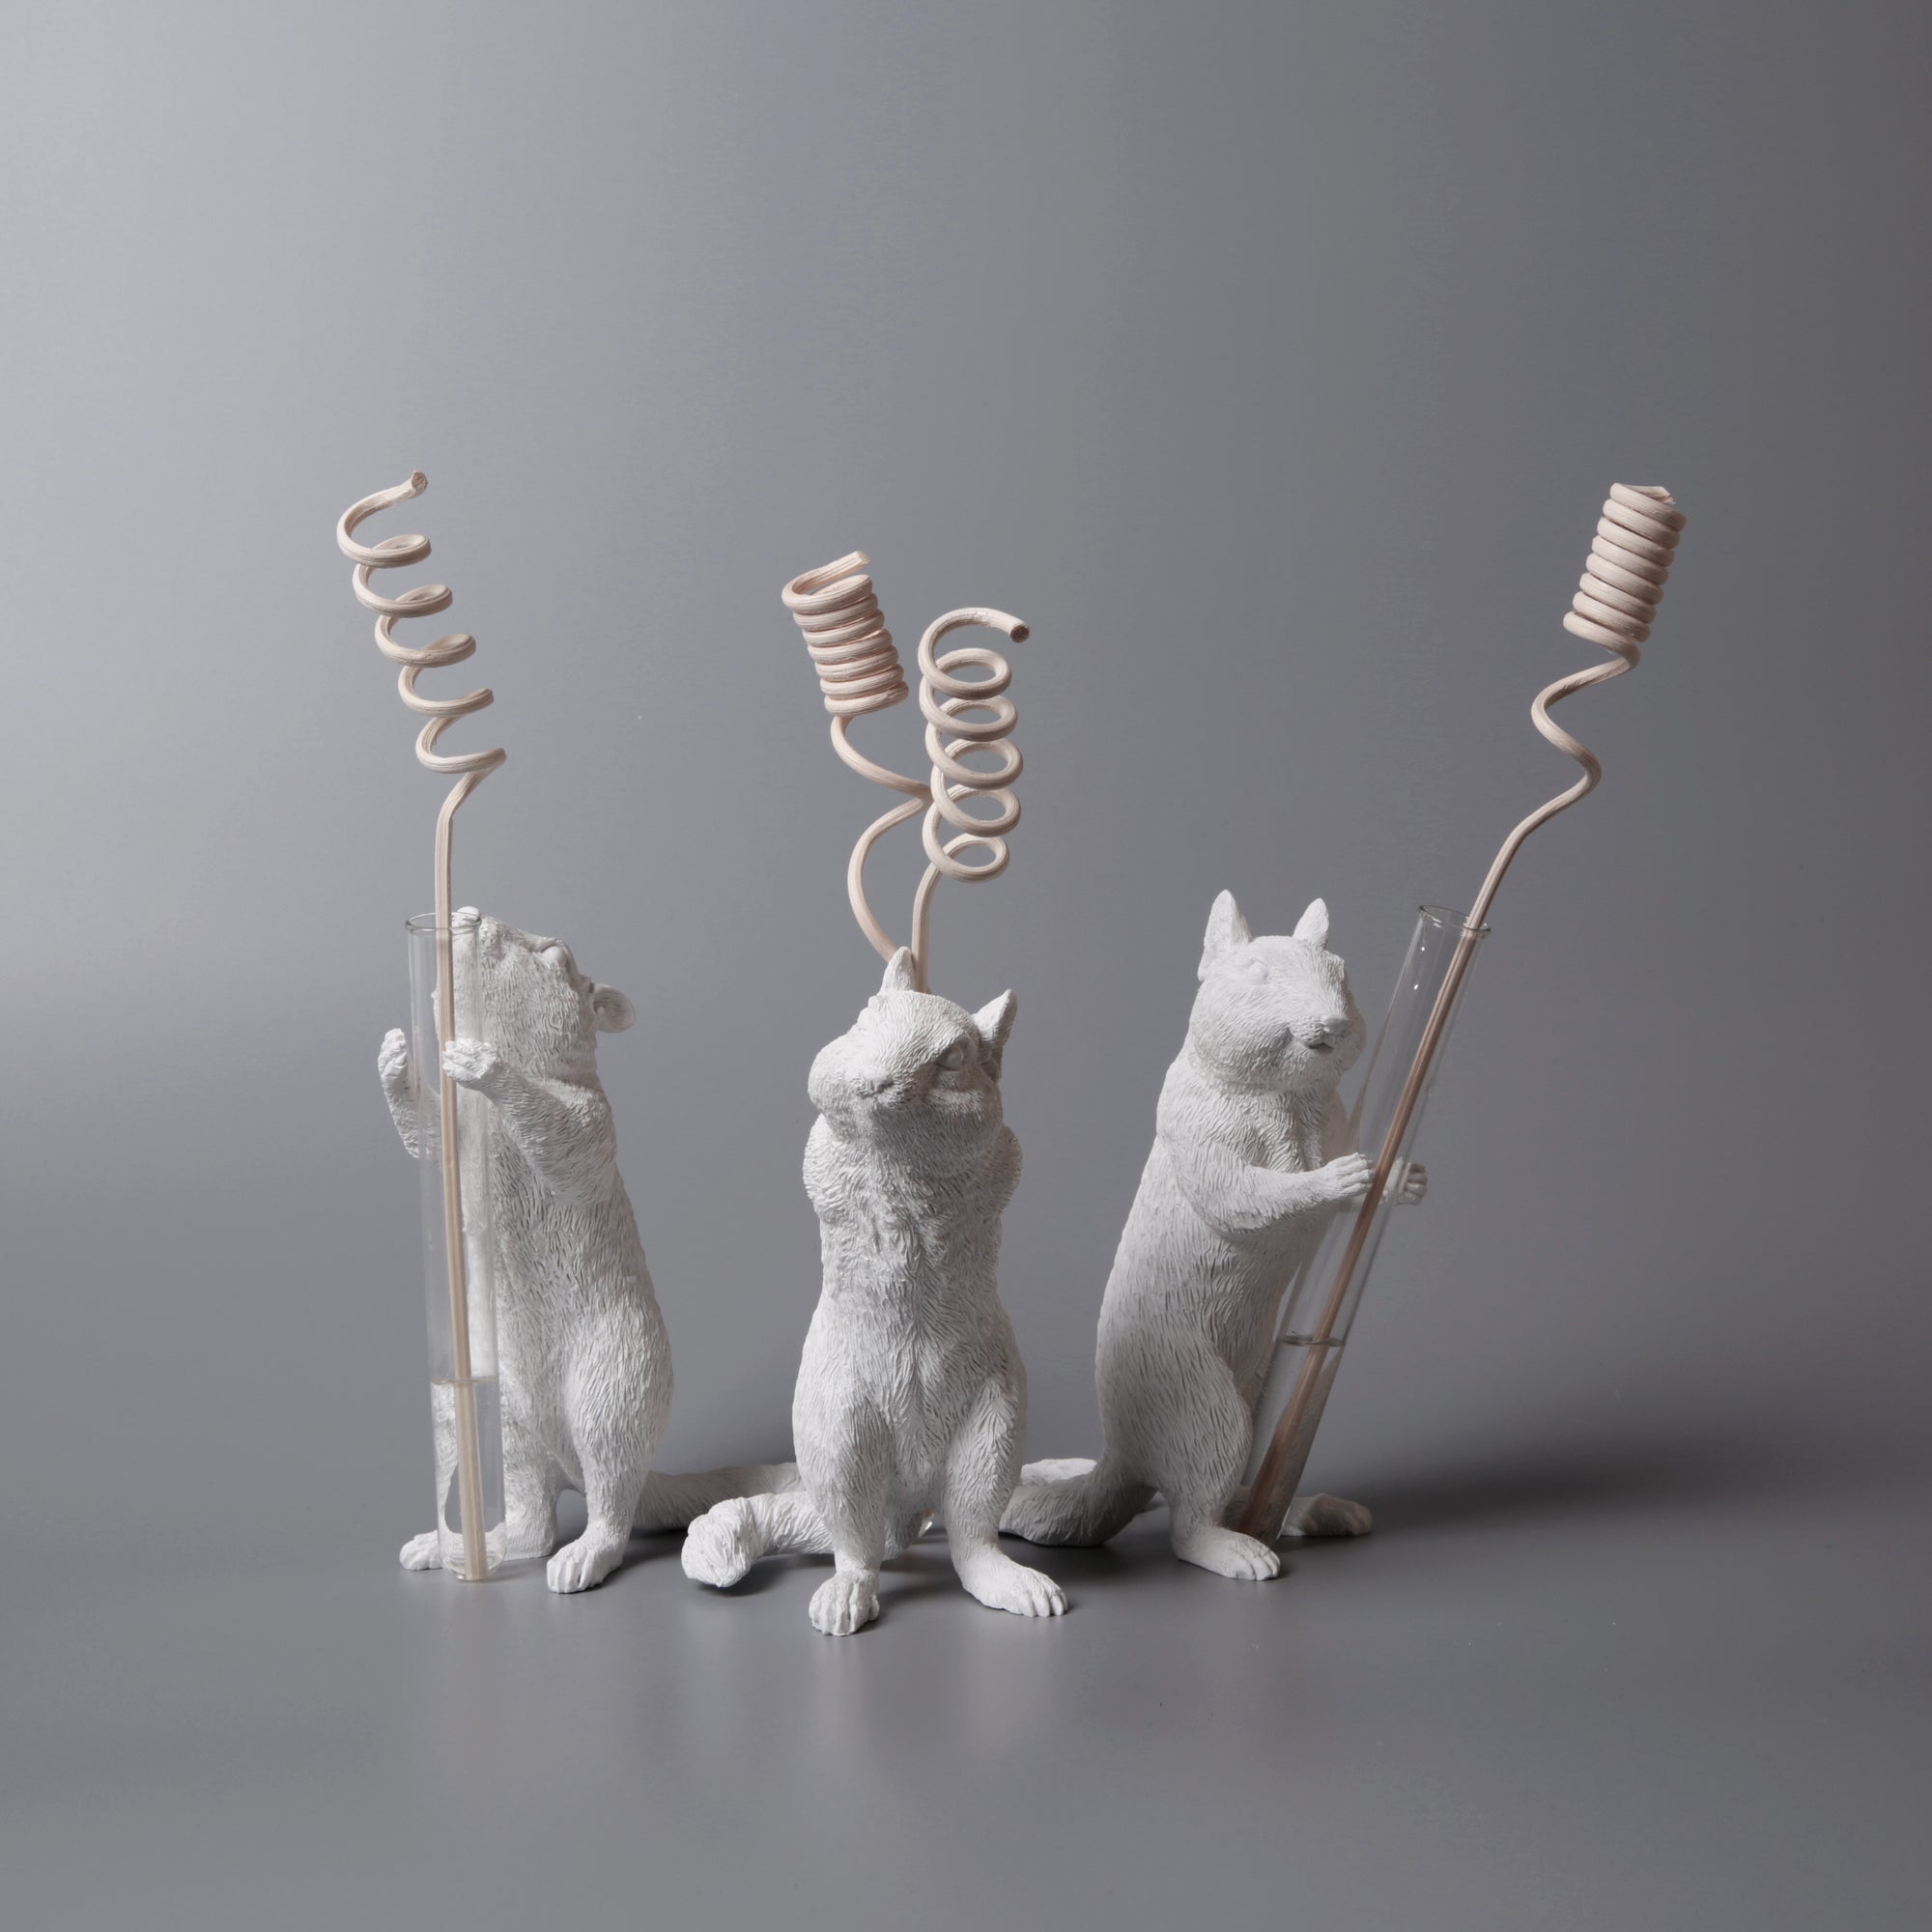 White Vase Series to Flowers and Diffuser Reeds with Squirrel Statue